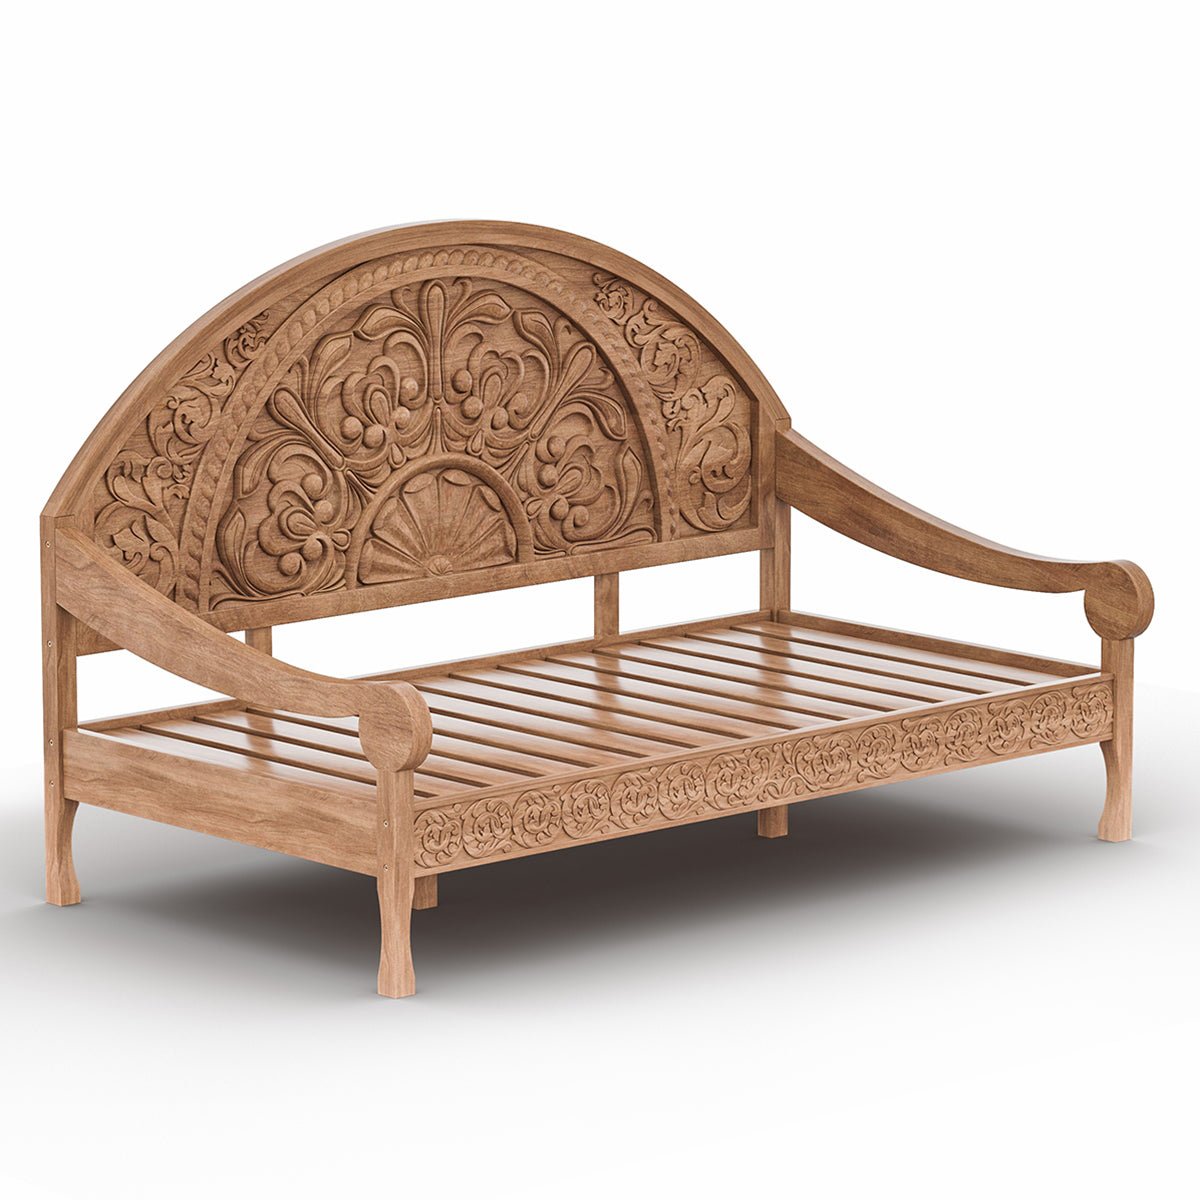 Zurich Rustic Solid Wood Traditional Handcarved Twin Size Daybed